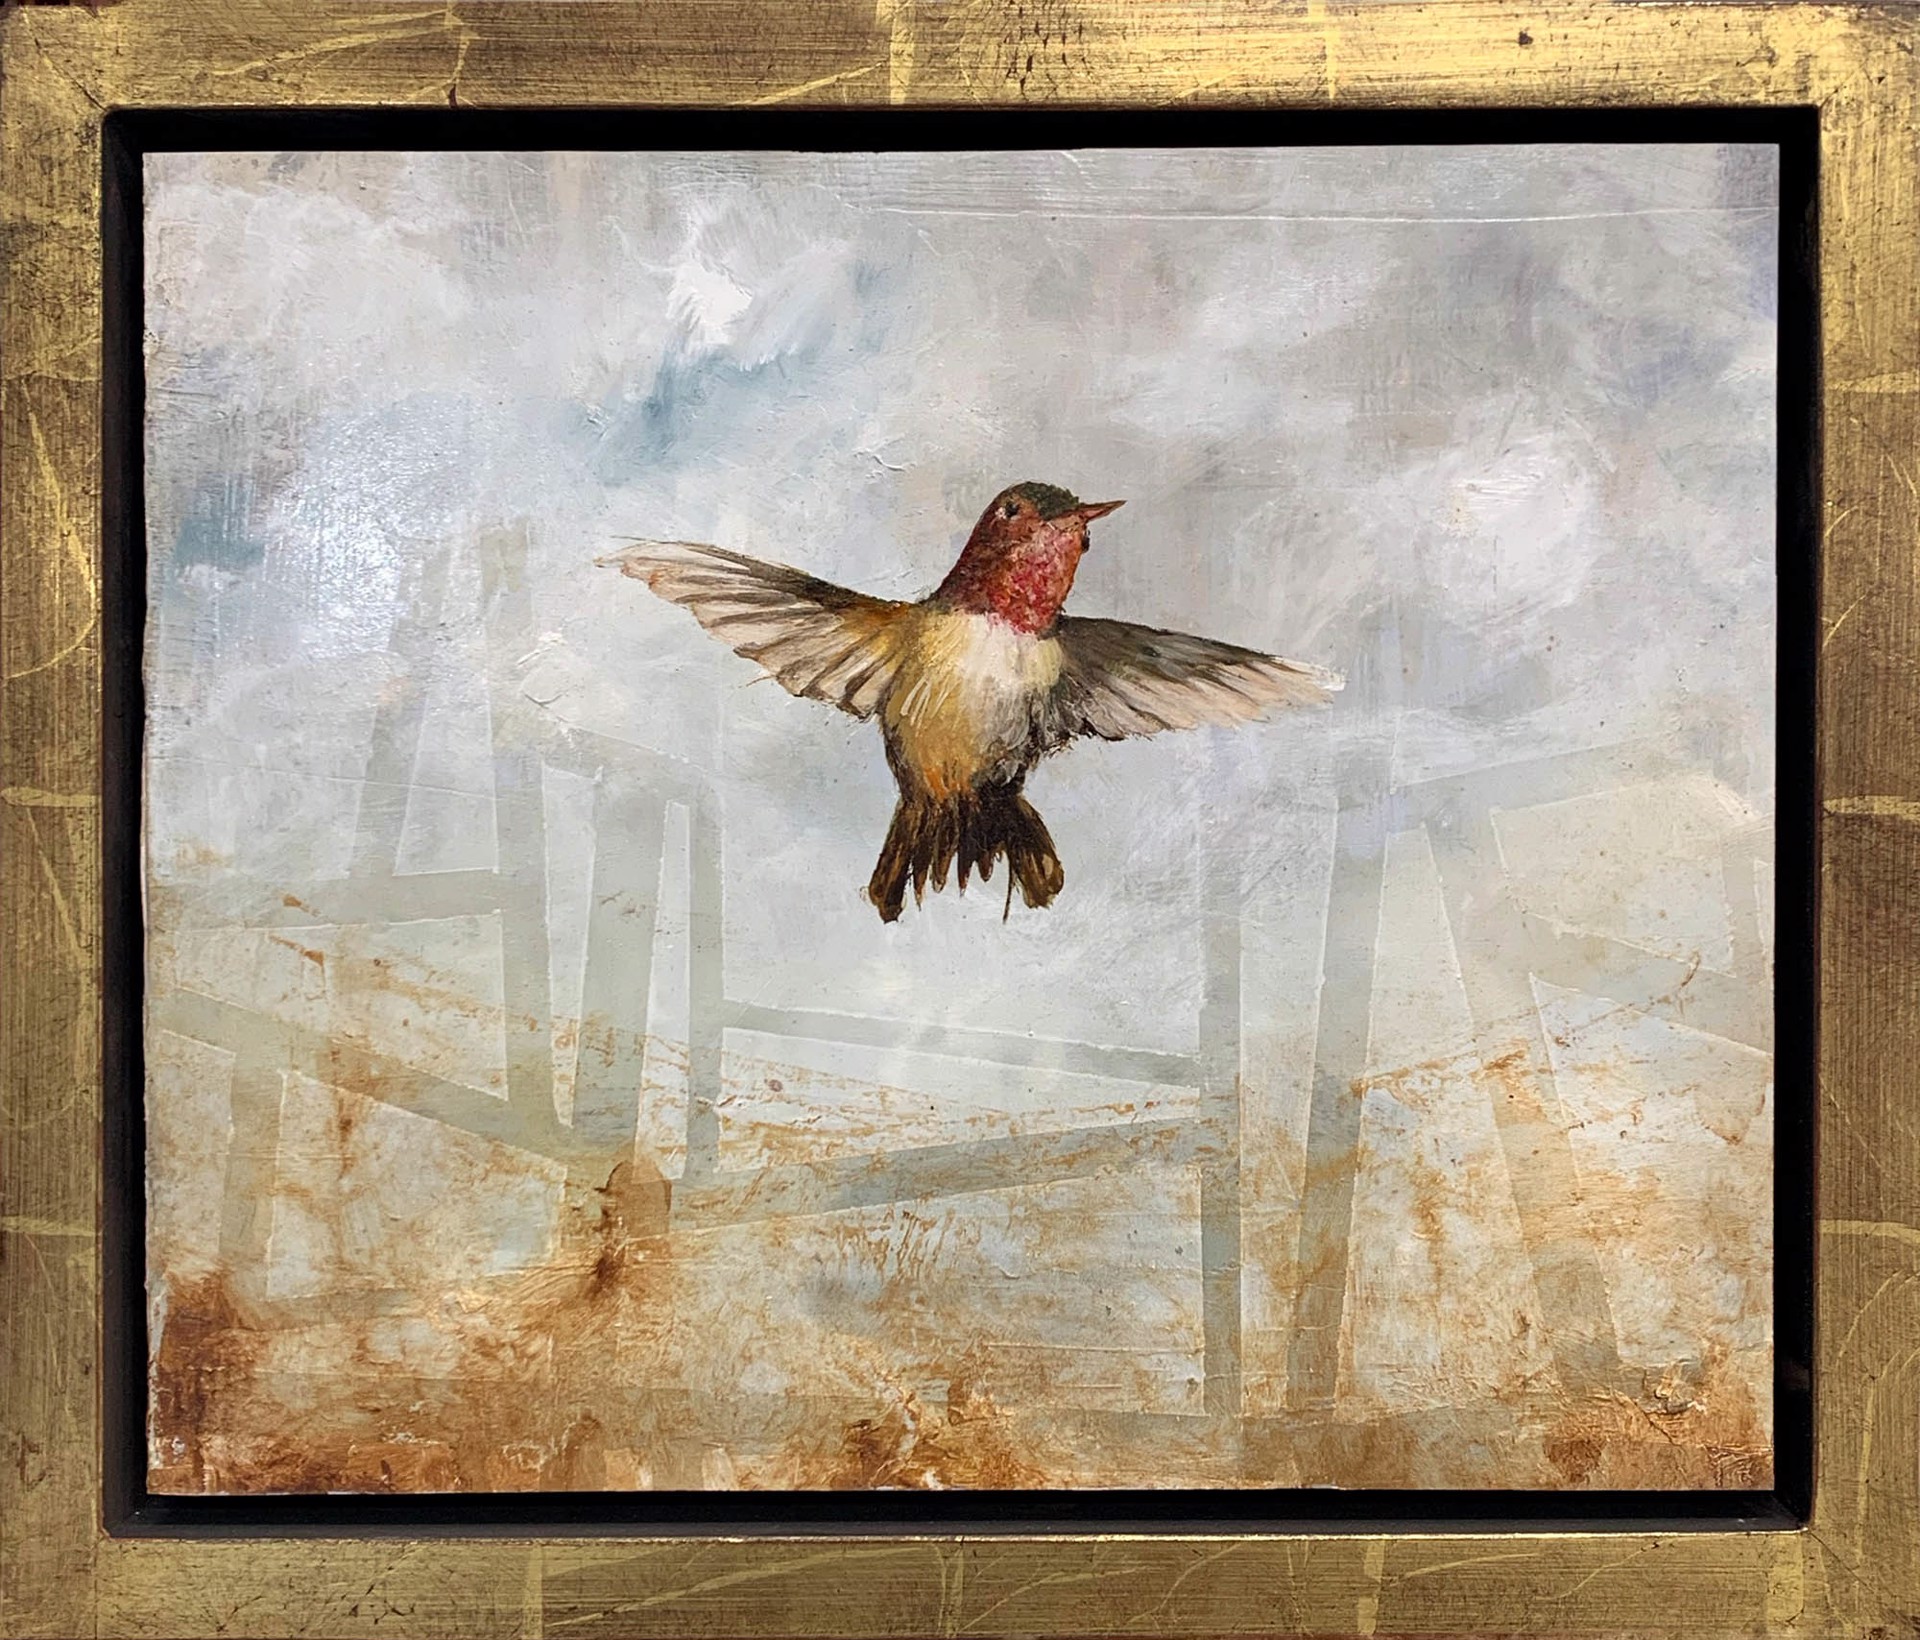 A Original Oil Painting Of A Humming Bird In Flight On A Abstract Gray Brown Patterned Background, By Jenna Von Benedikt